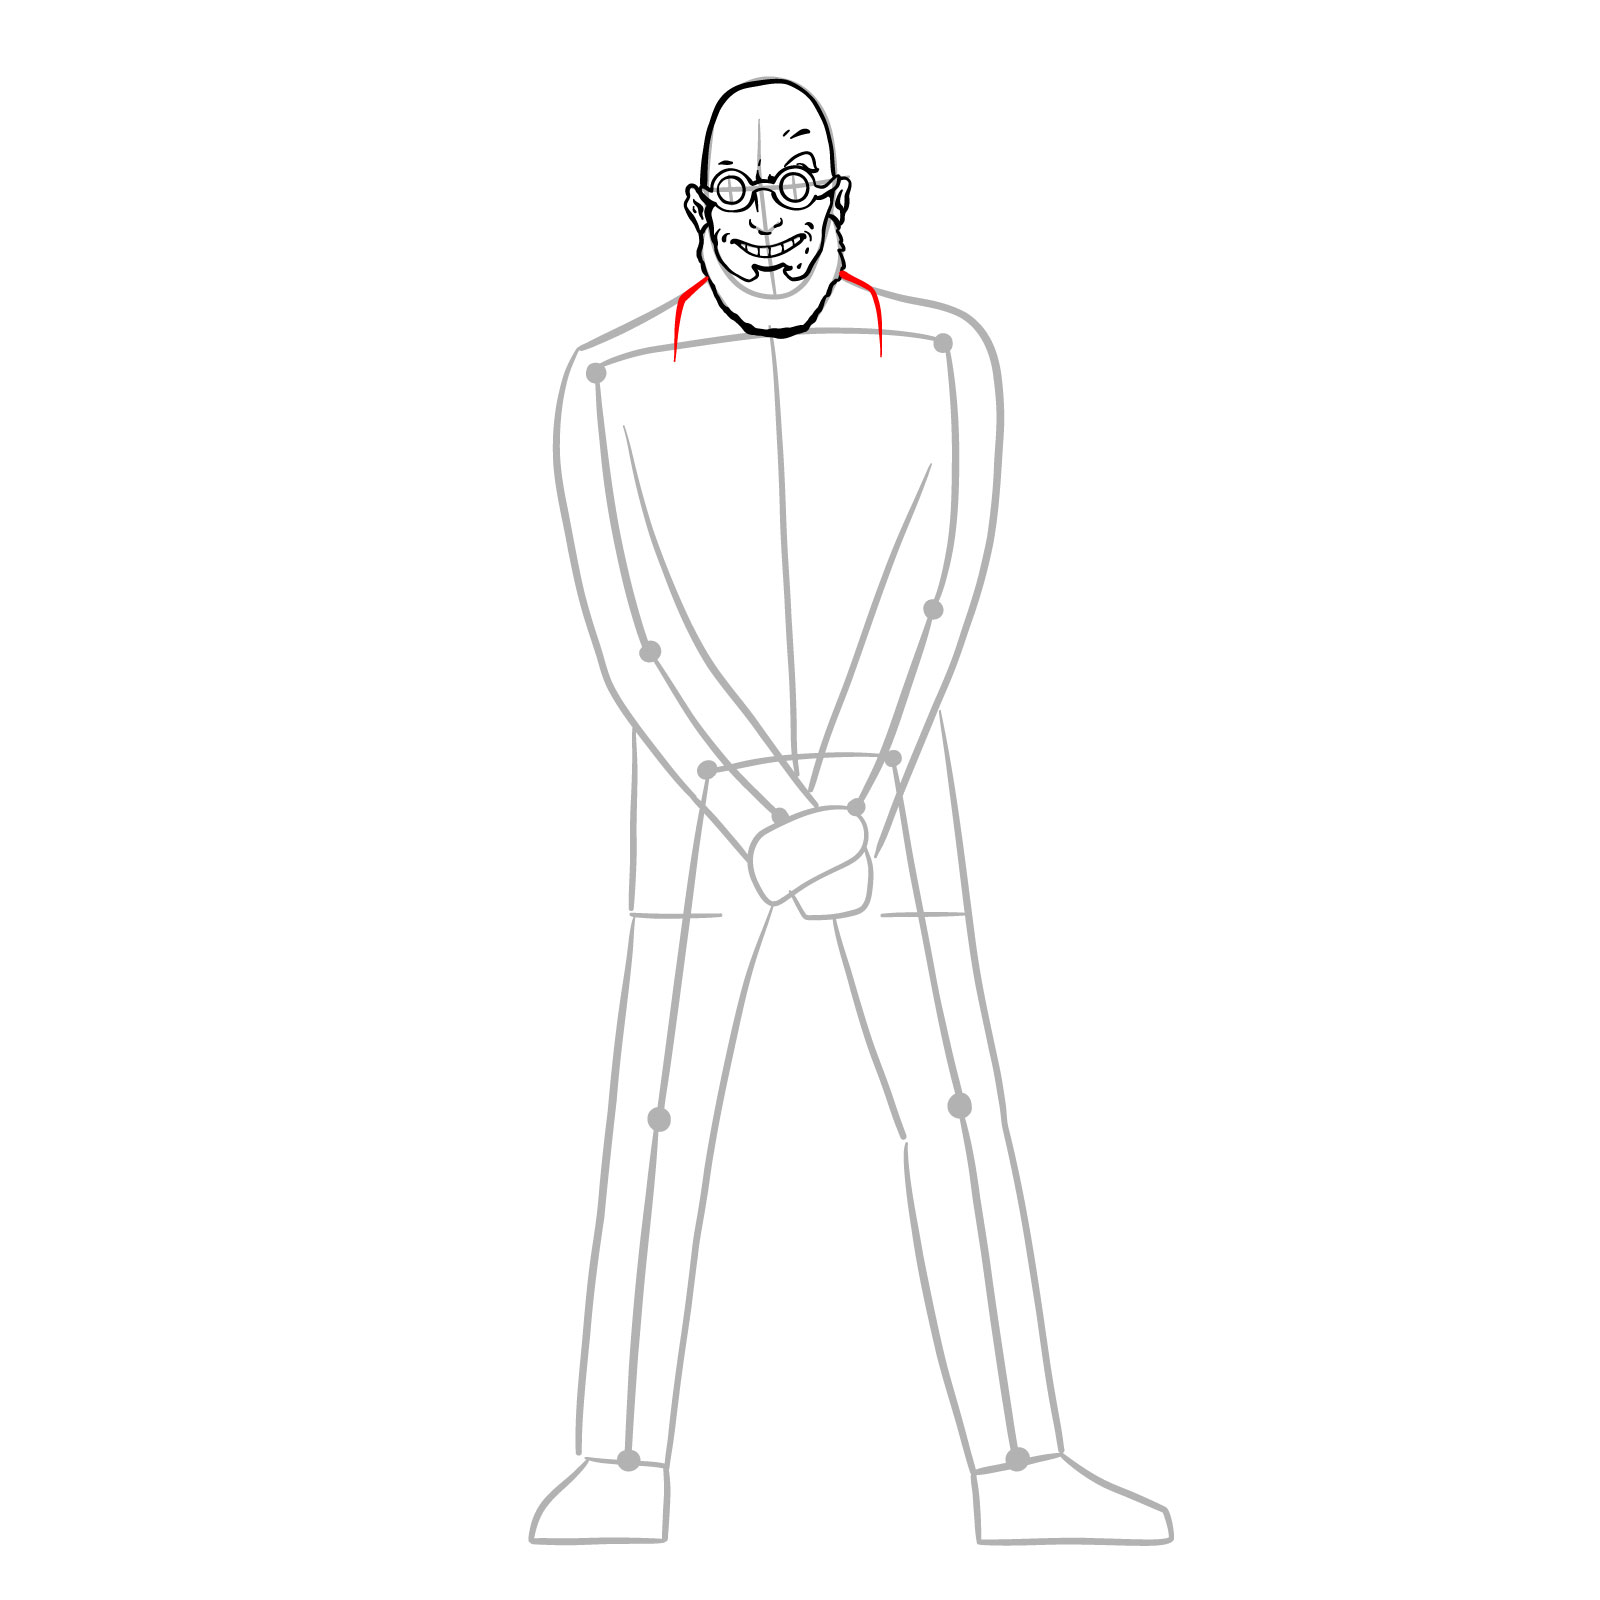 How to draw Dr. Hugo Strange from DC Comics - step 15